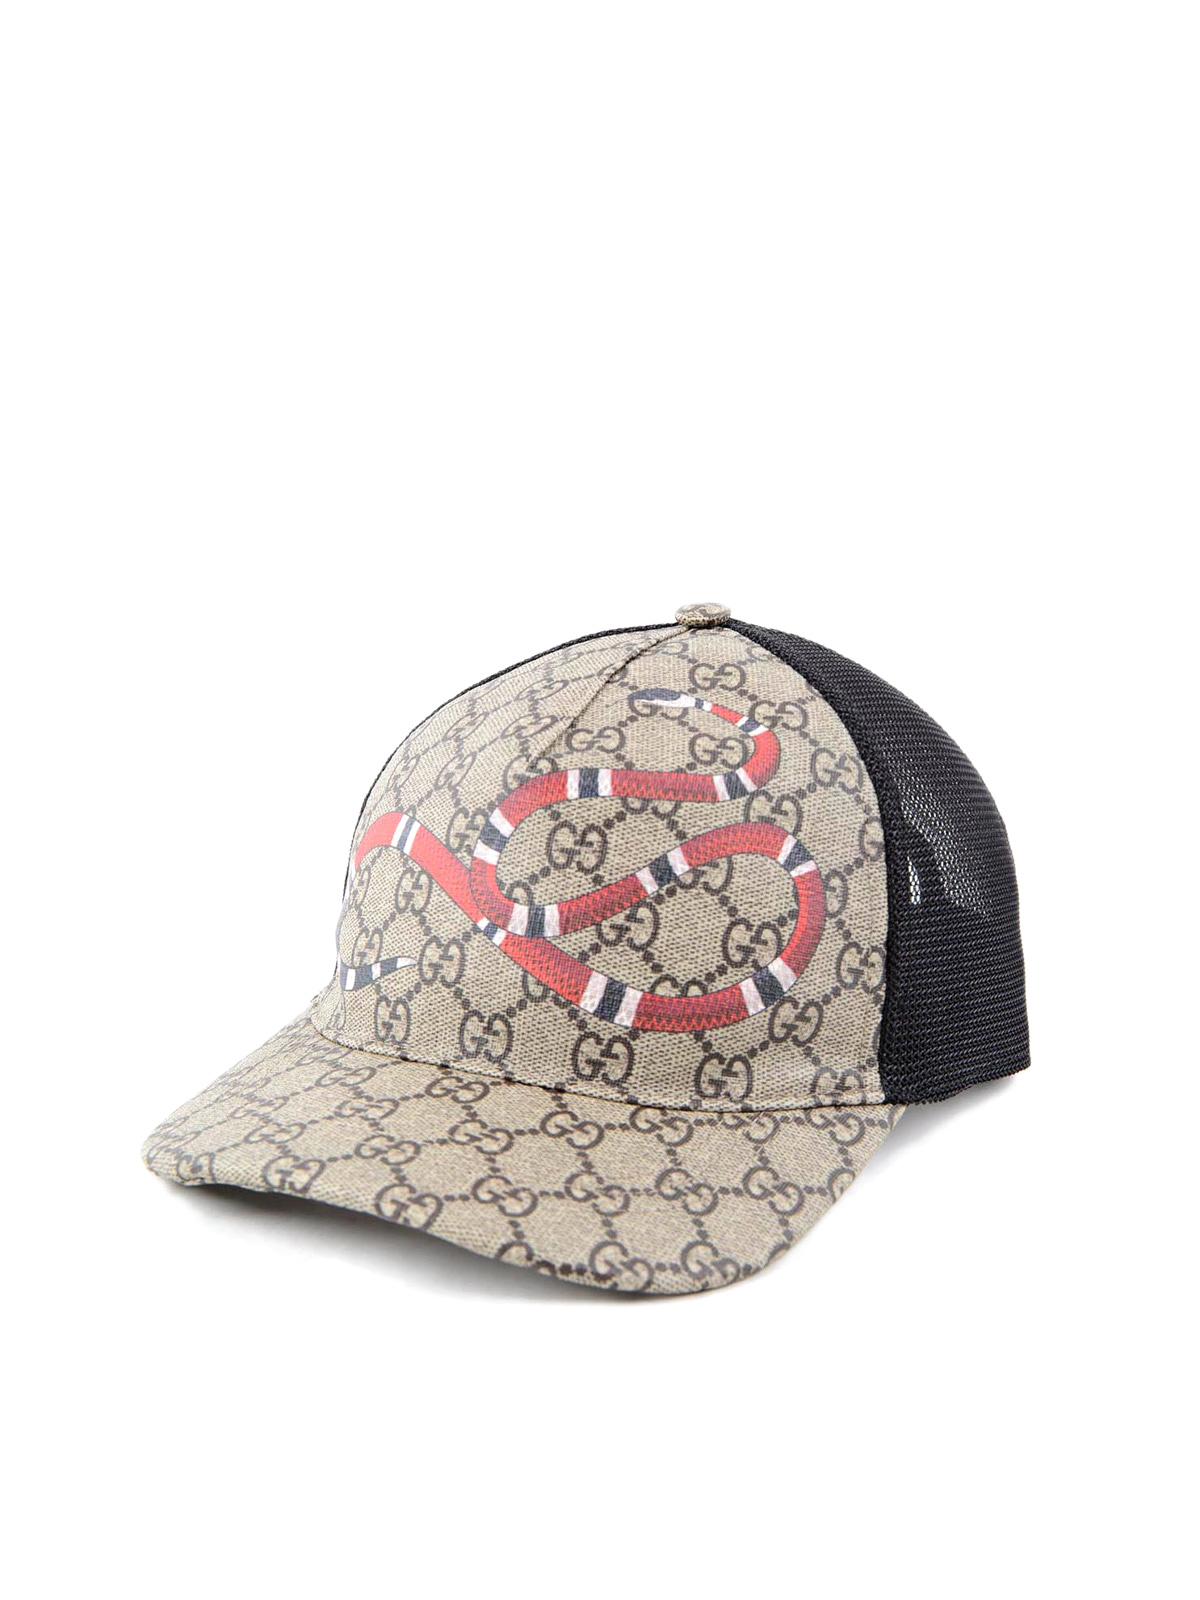 gucci hat with snake